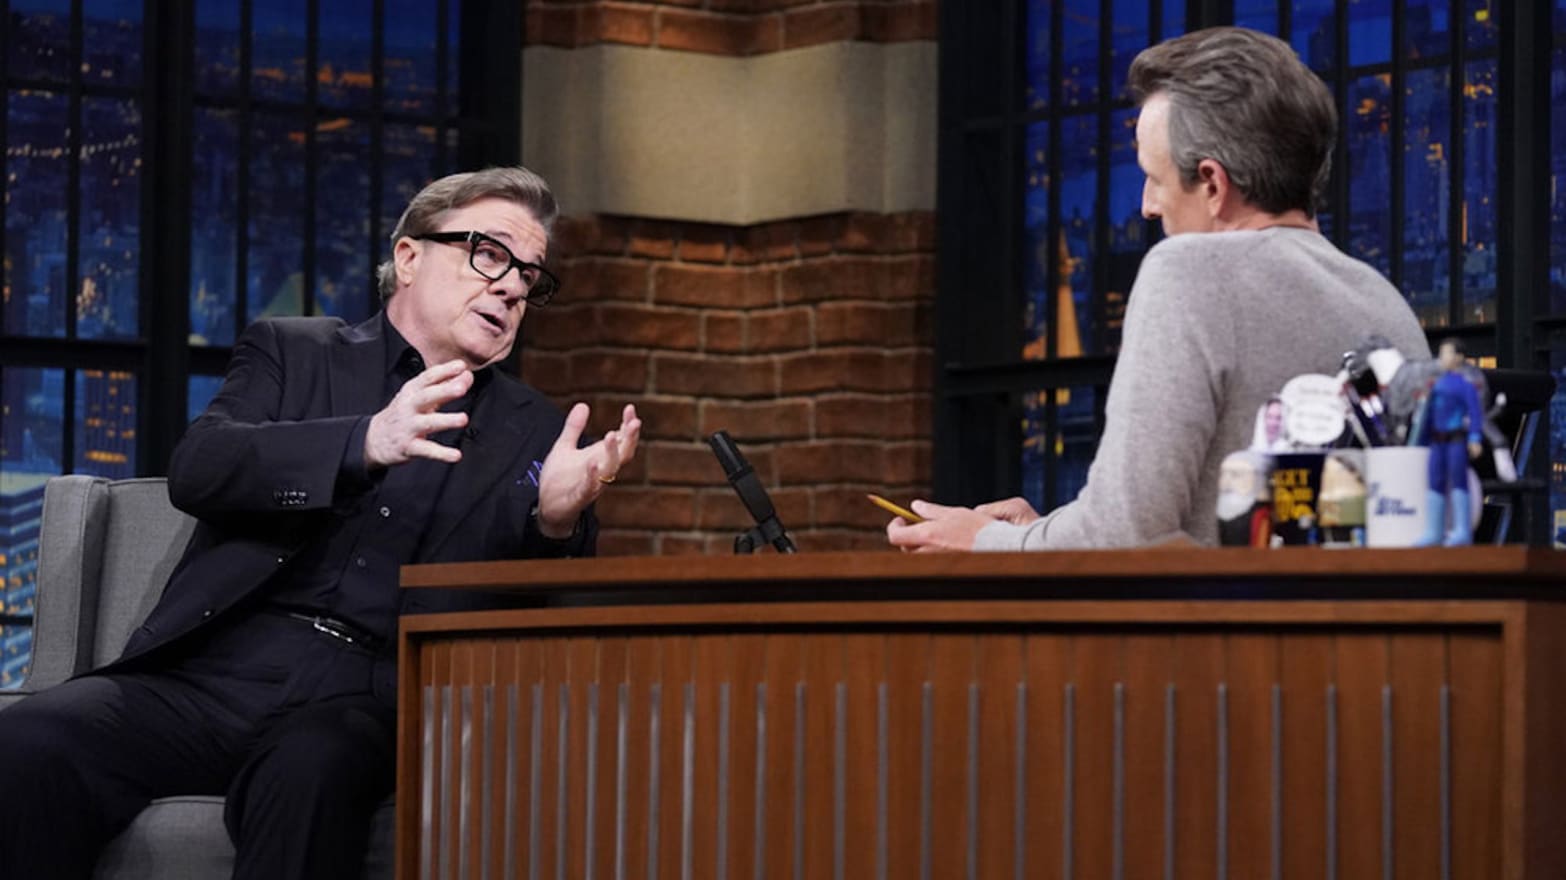 Actor Nathan Lane during an interview with host Seth Meyers